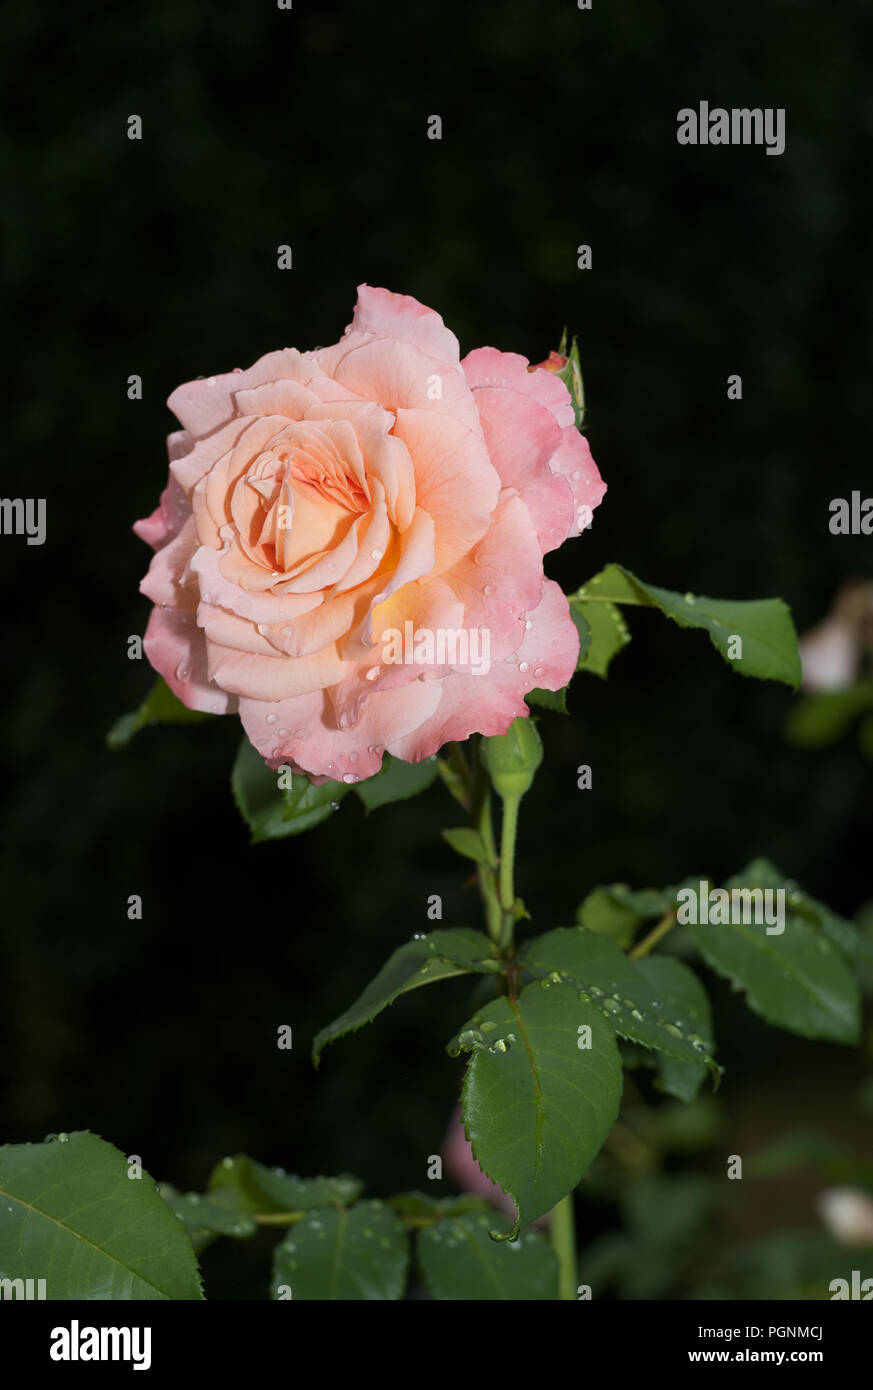 Fresh Thaw on a Single Pale Pink Rose Stock Photo